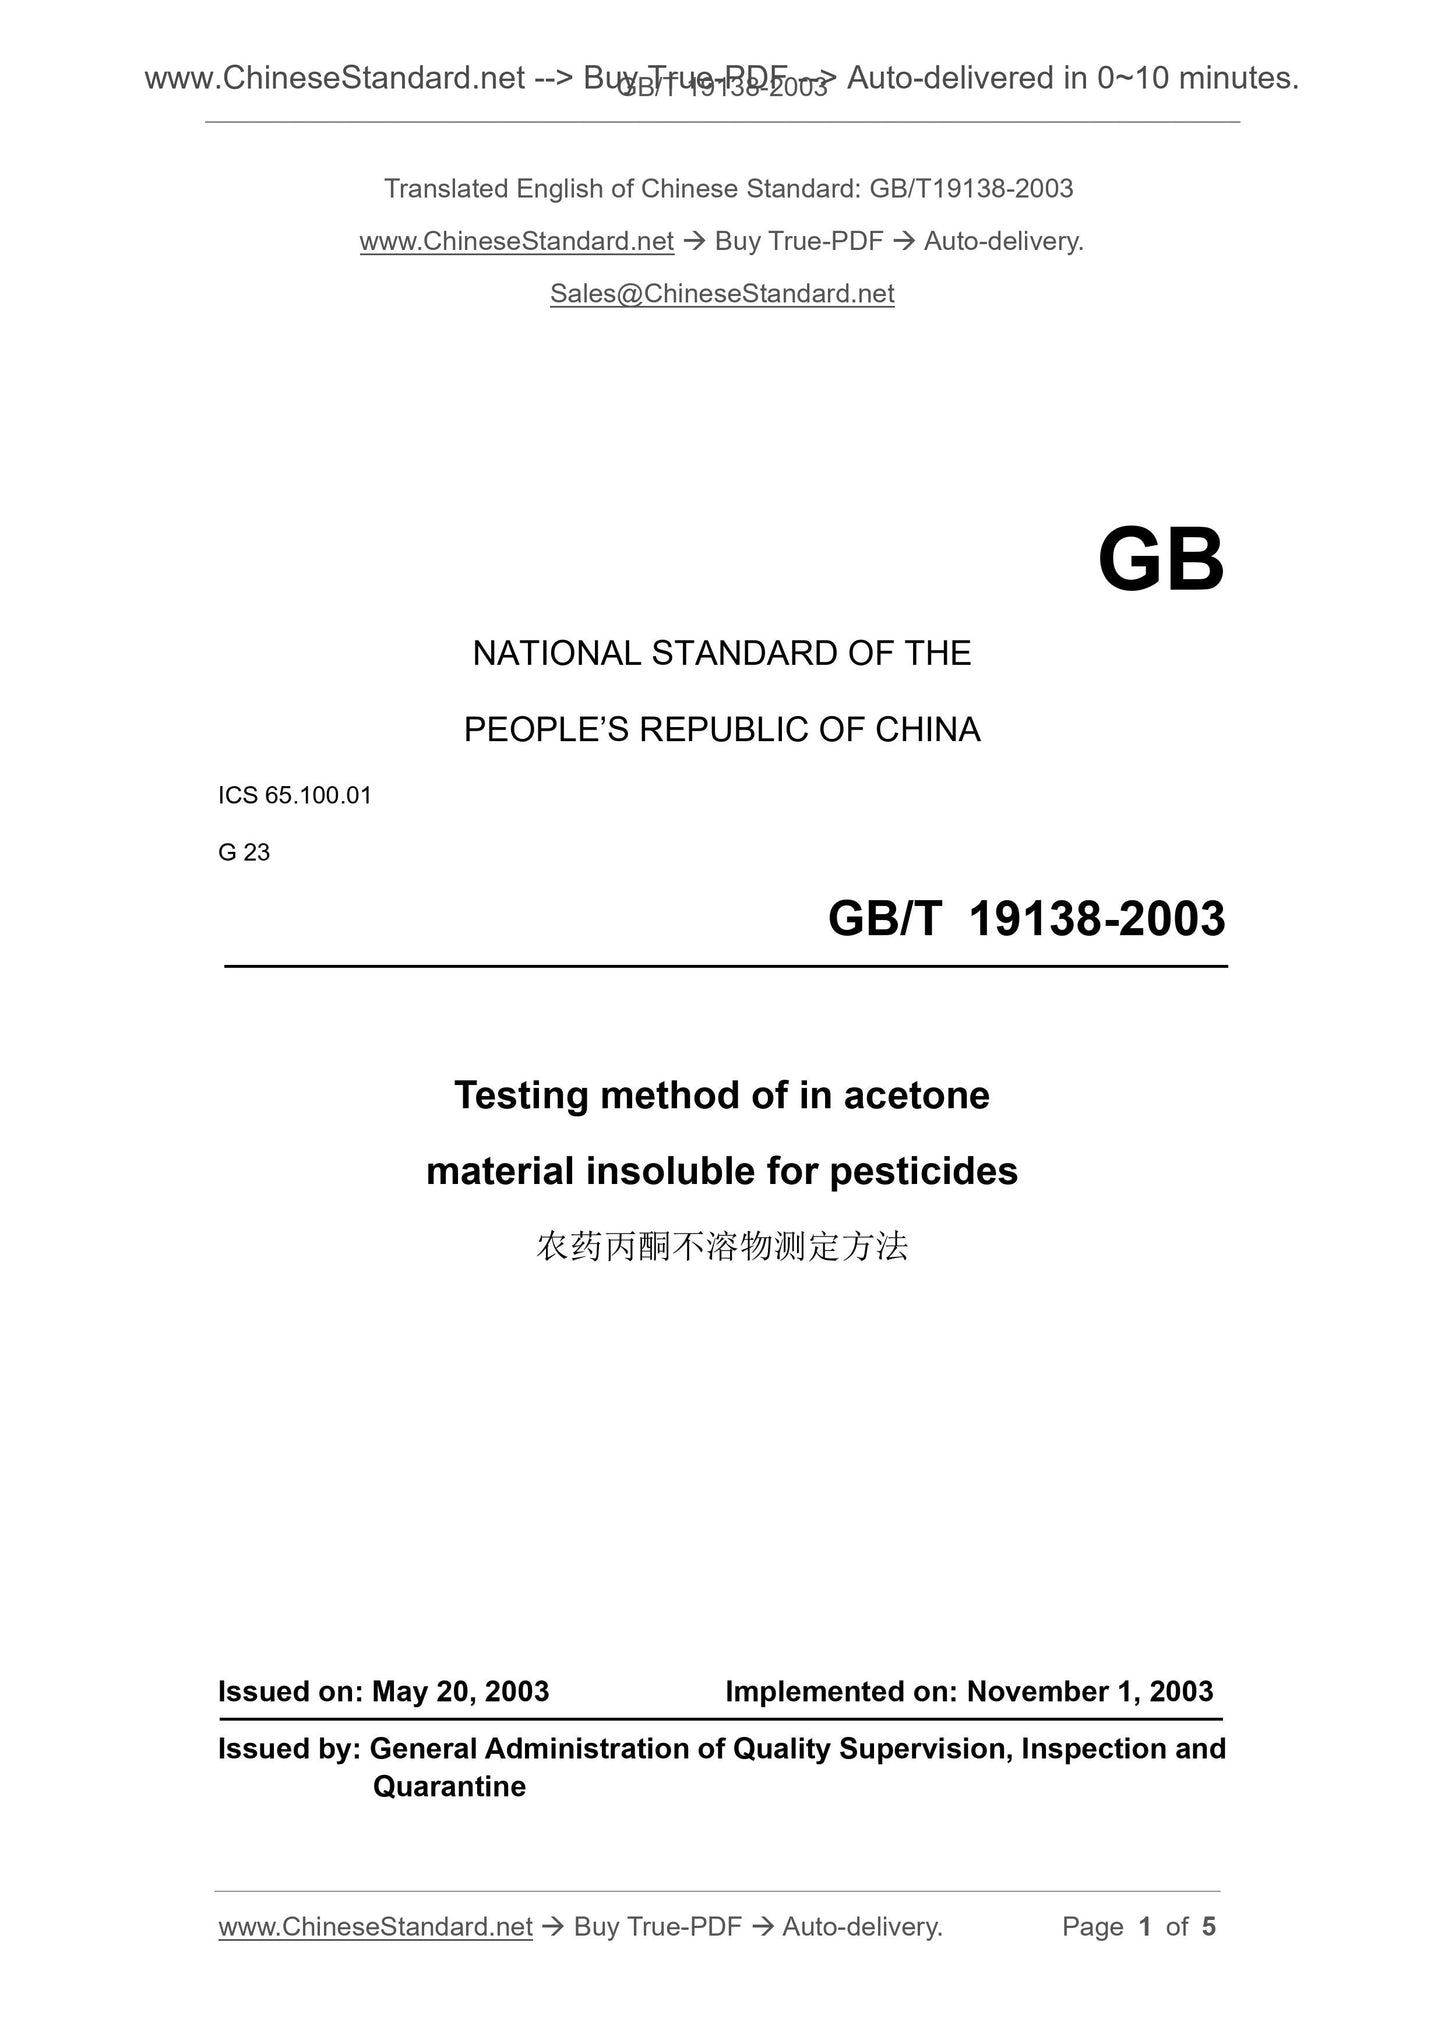 GB/T 19138-2003 Page 1